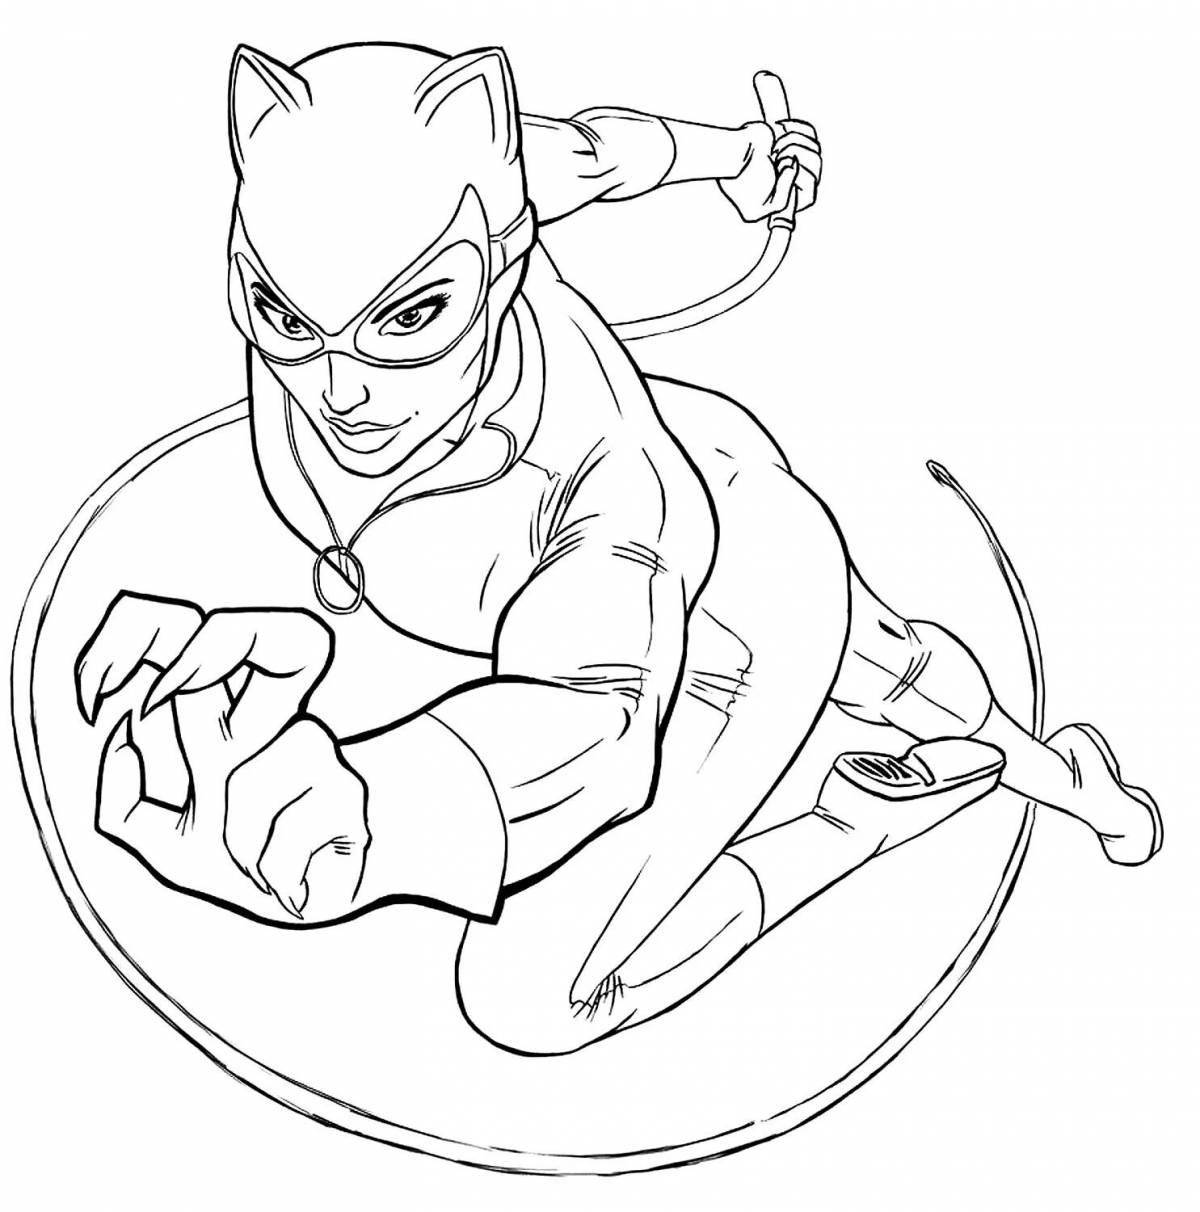 Coloring page graceful catwoman